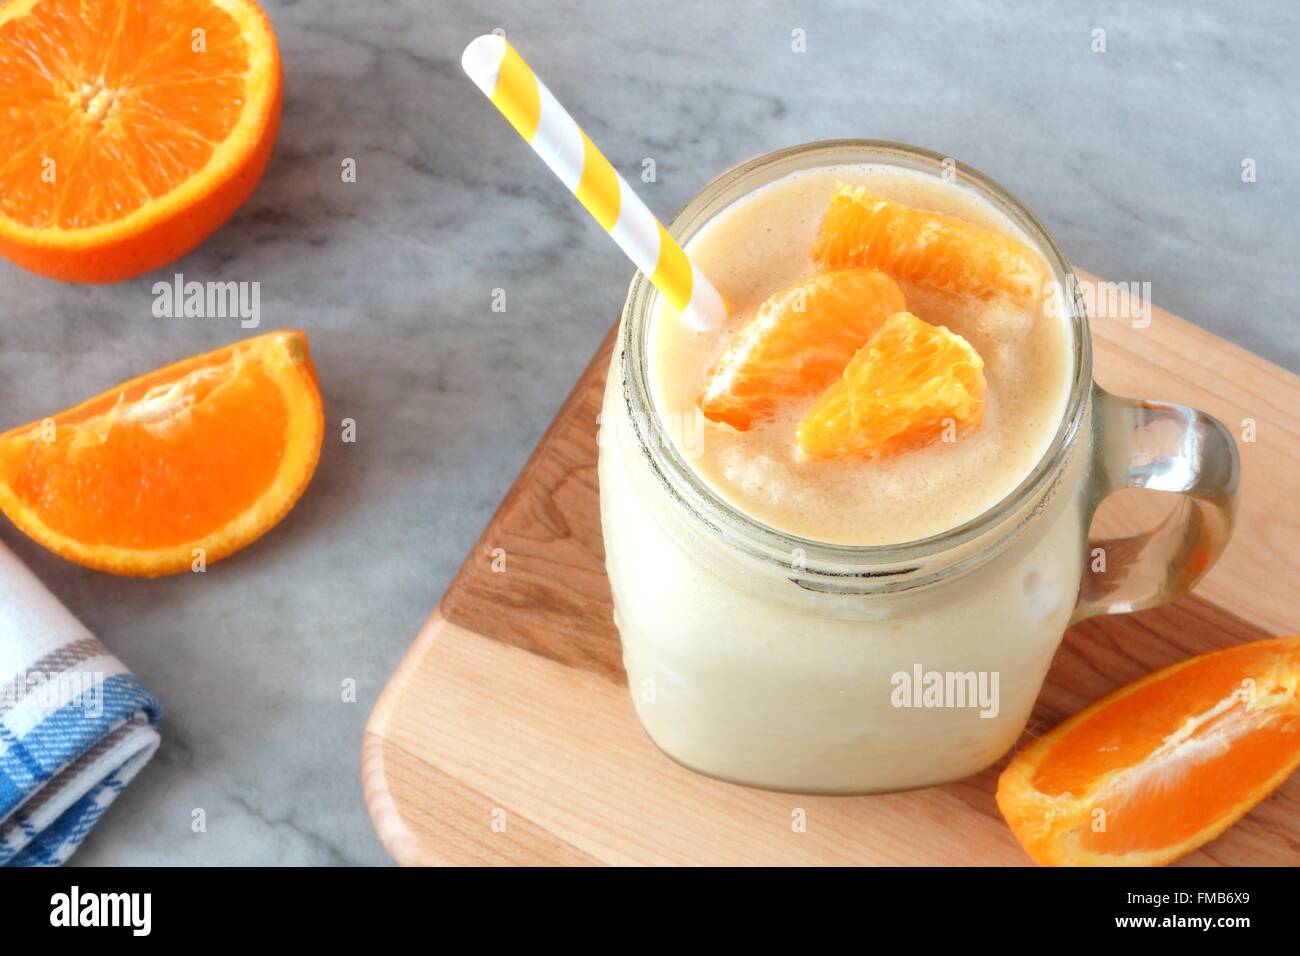 Orange fruit smoothie in a mason jar glass with straw resting on wood with fresh orange slices over a granite background Stock Photo